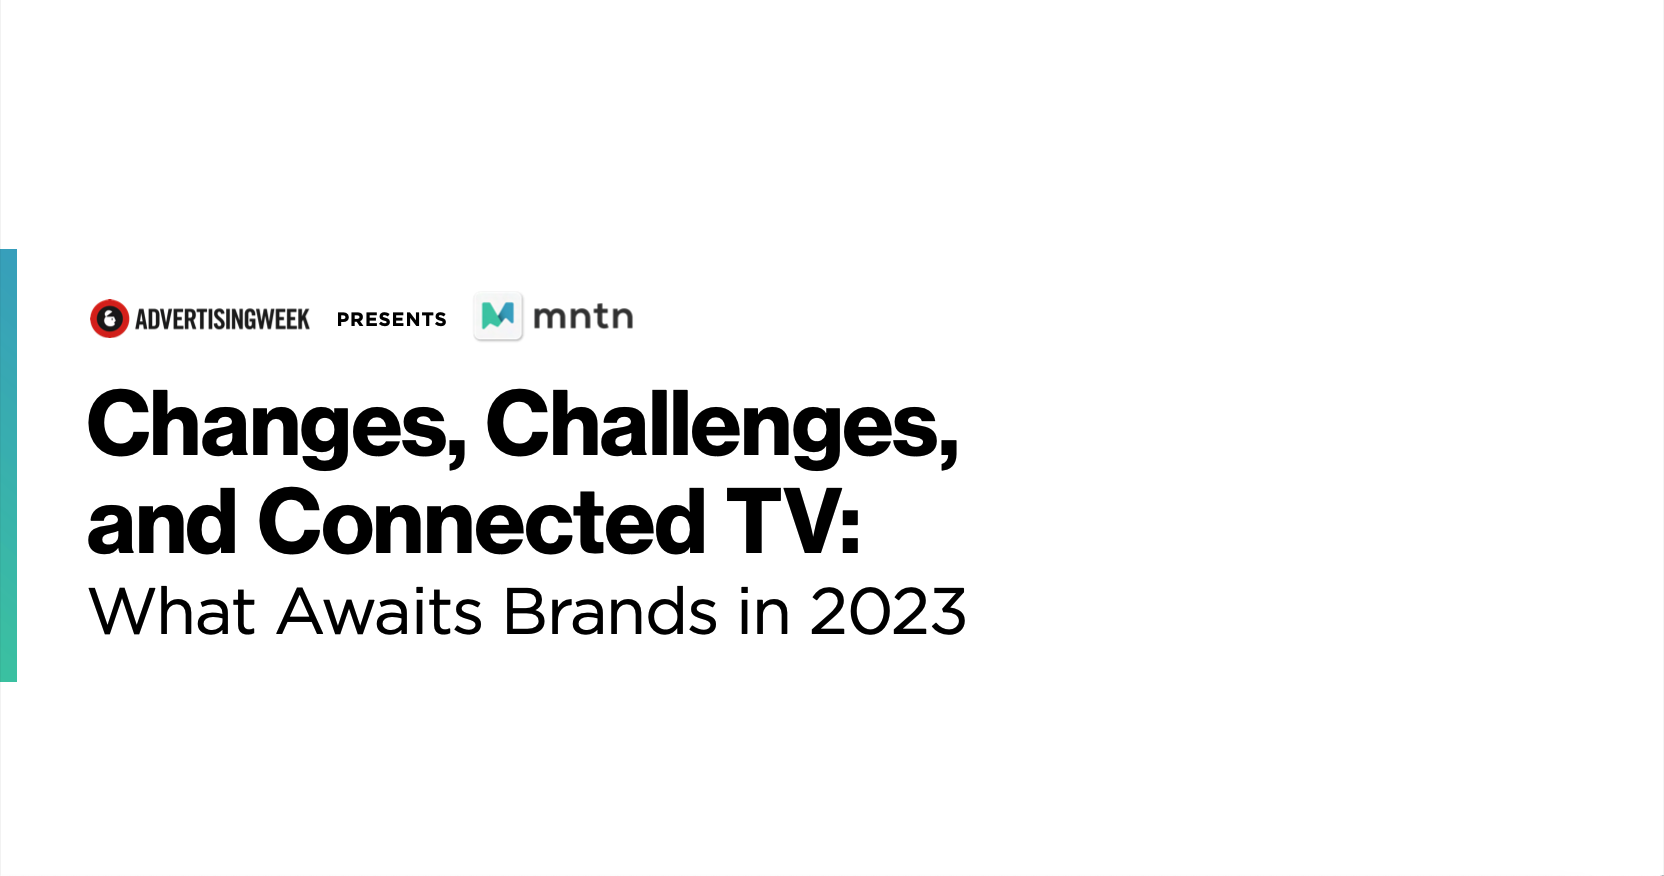 Changes, Challenges, and Connected TV: What Awaits Brands in 2023